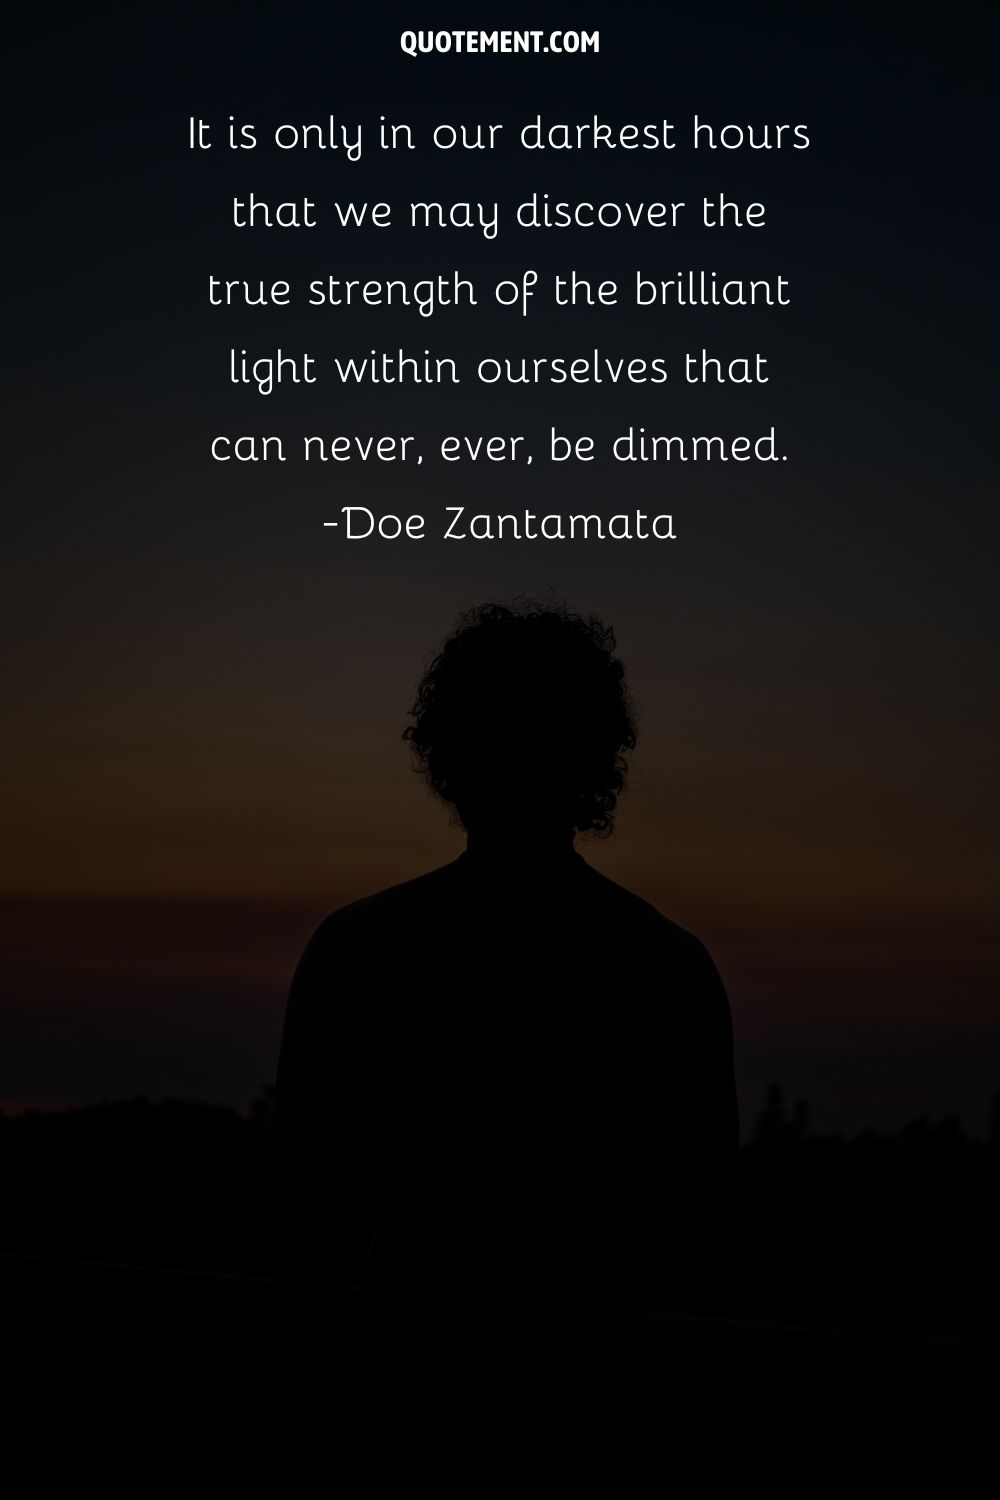 It is only in our darkest hours that we may discover the true strength of the brilliant light within ourselves that can never, ever, be dimmed